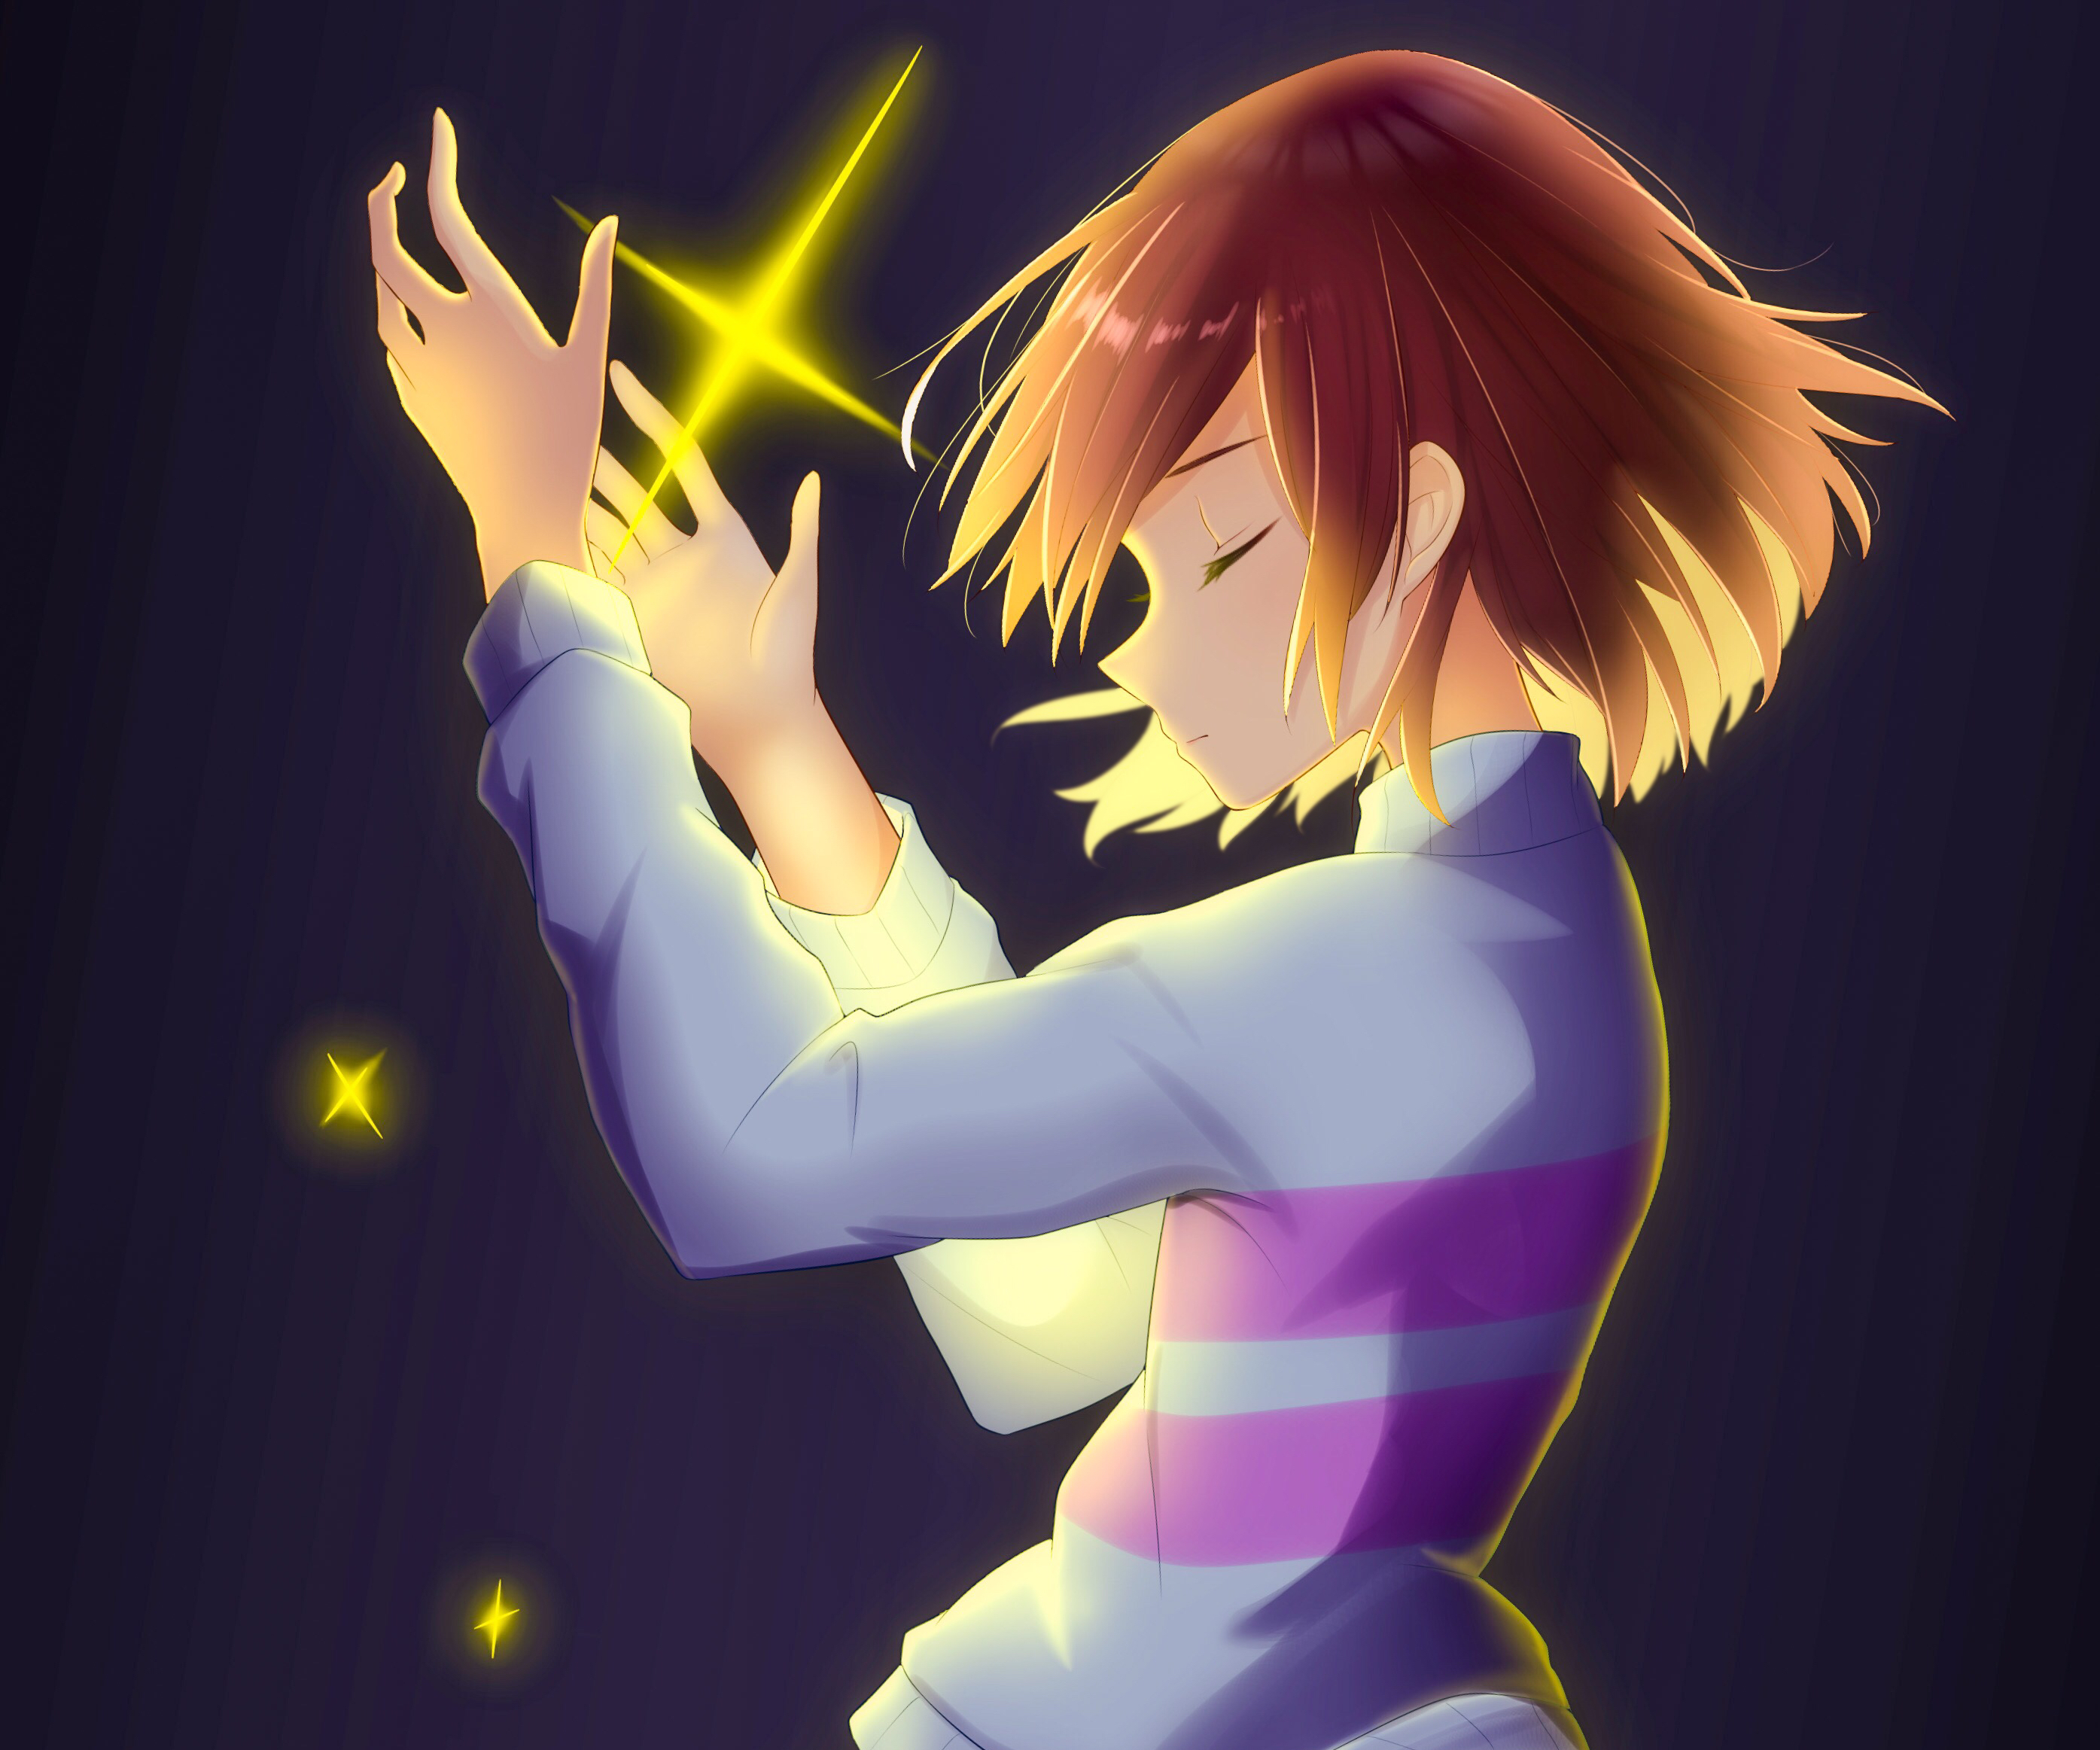 Undertale Frisk in cave with golden flowers